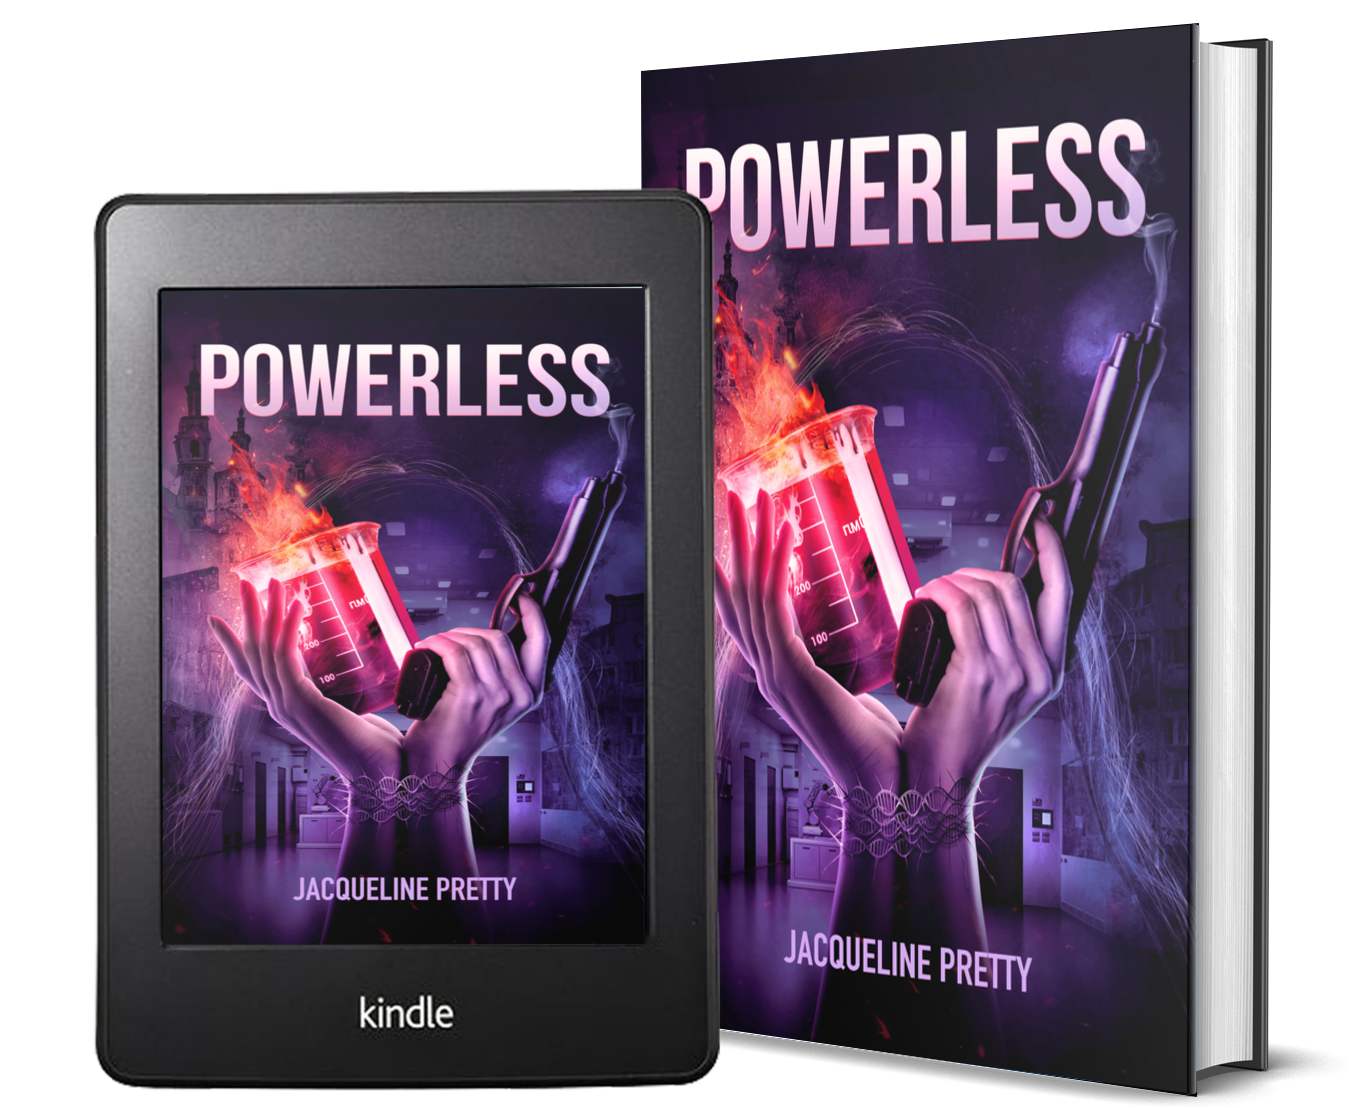 Powerless by Jacqueline Pretty - ebook and paperback image.